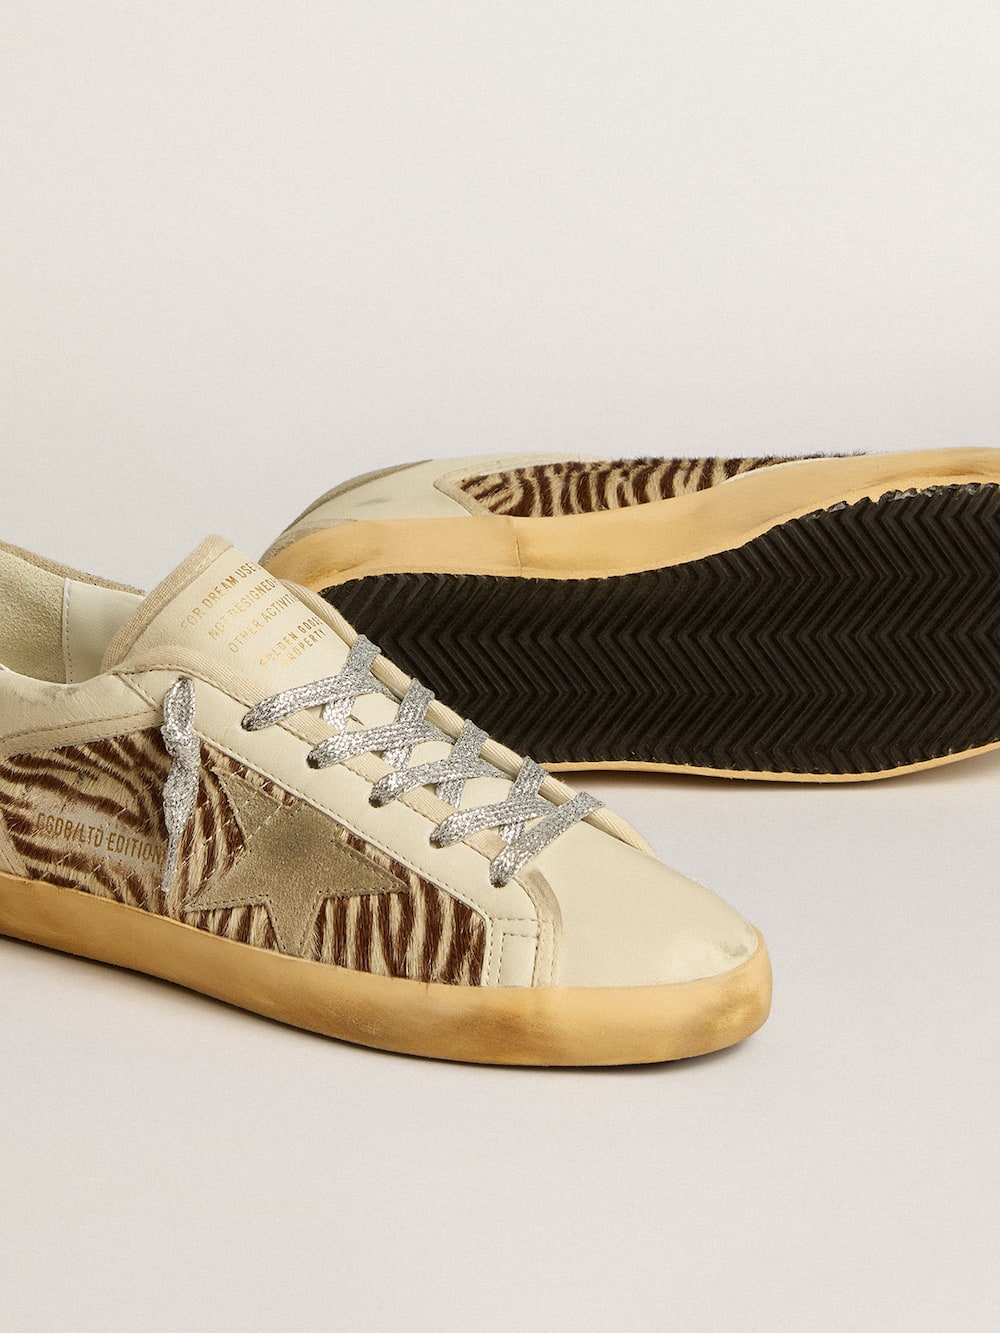 Golden Goose - Women's Super-Star in leather and pony skin with dove-gray suede star and heel tab in 